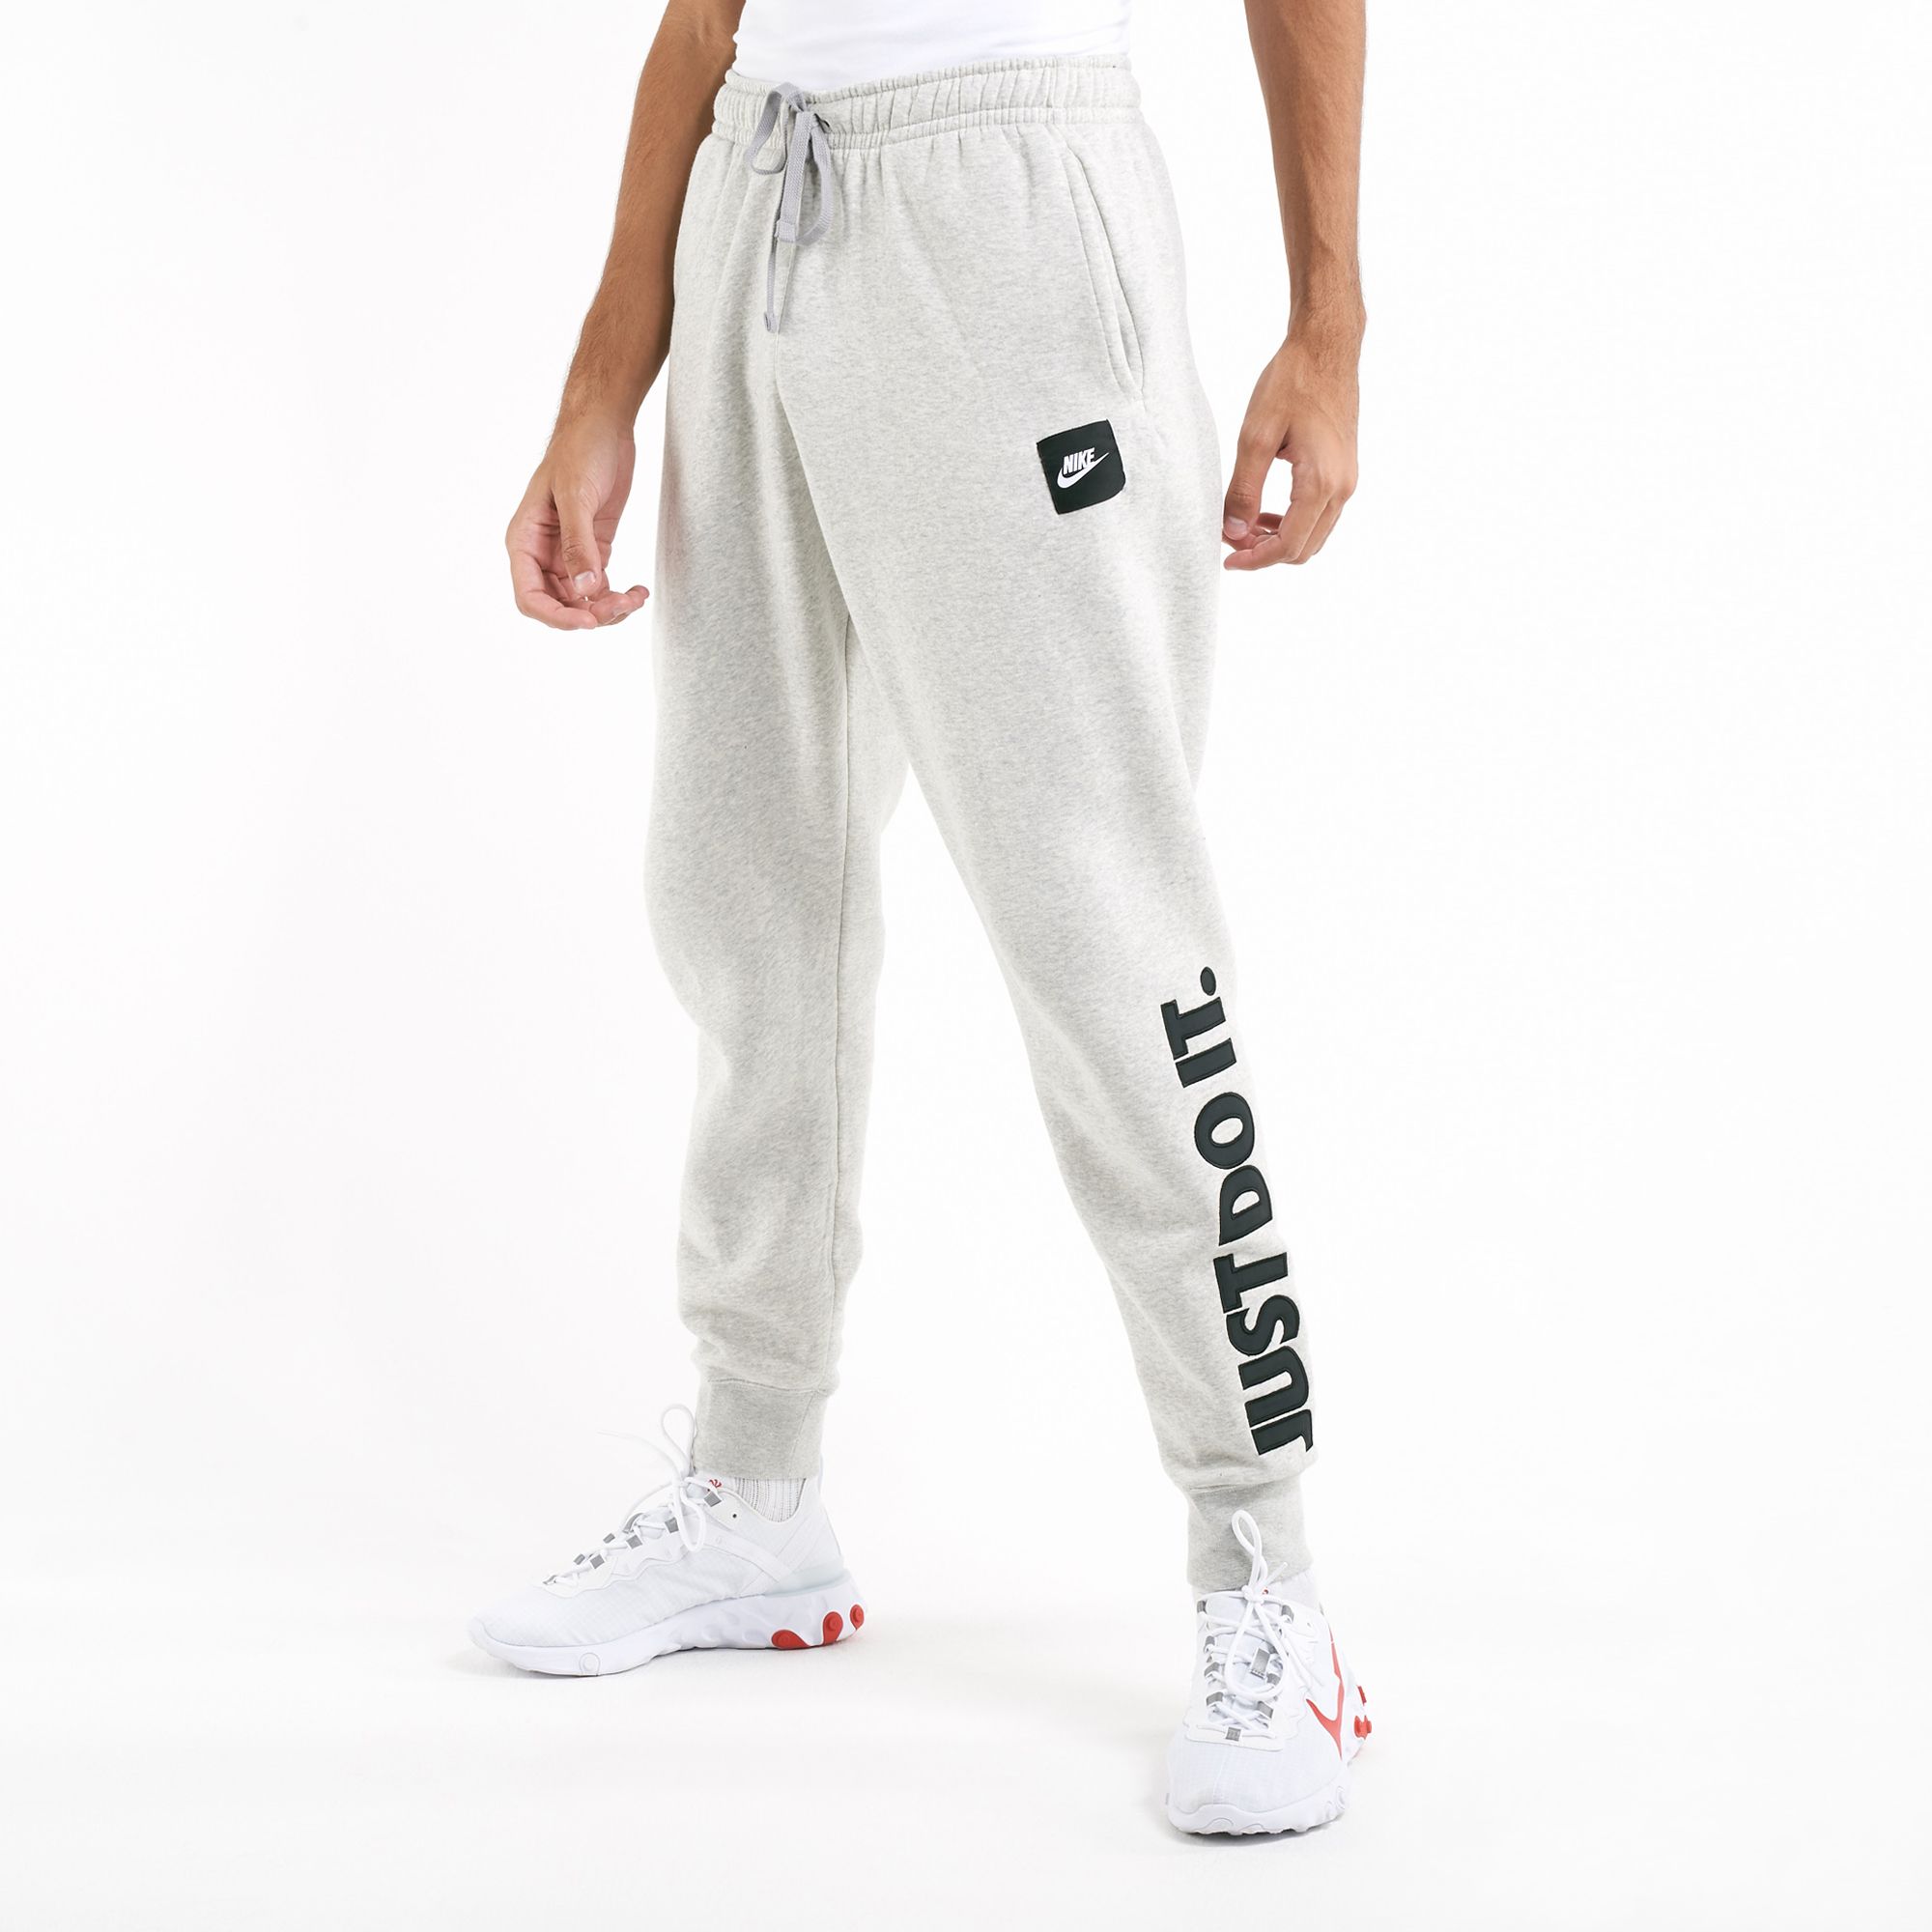 just do it track pants